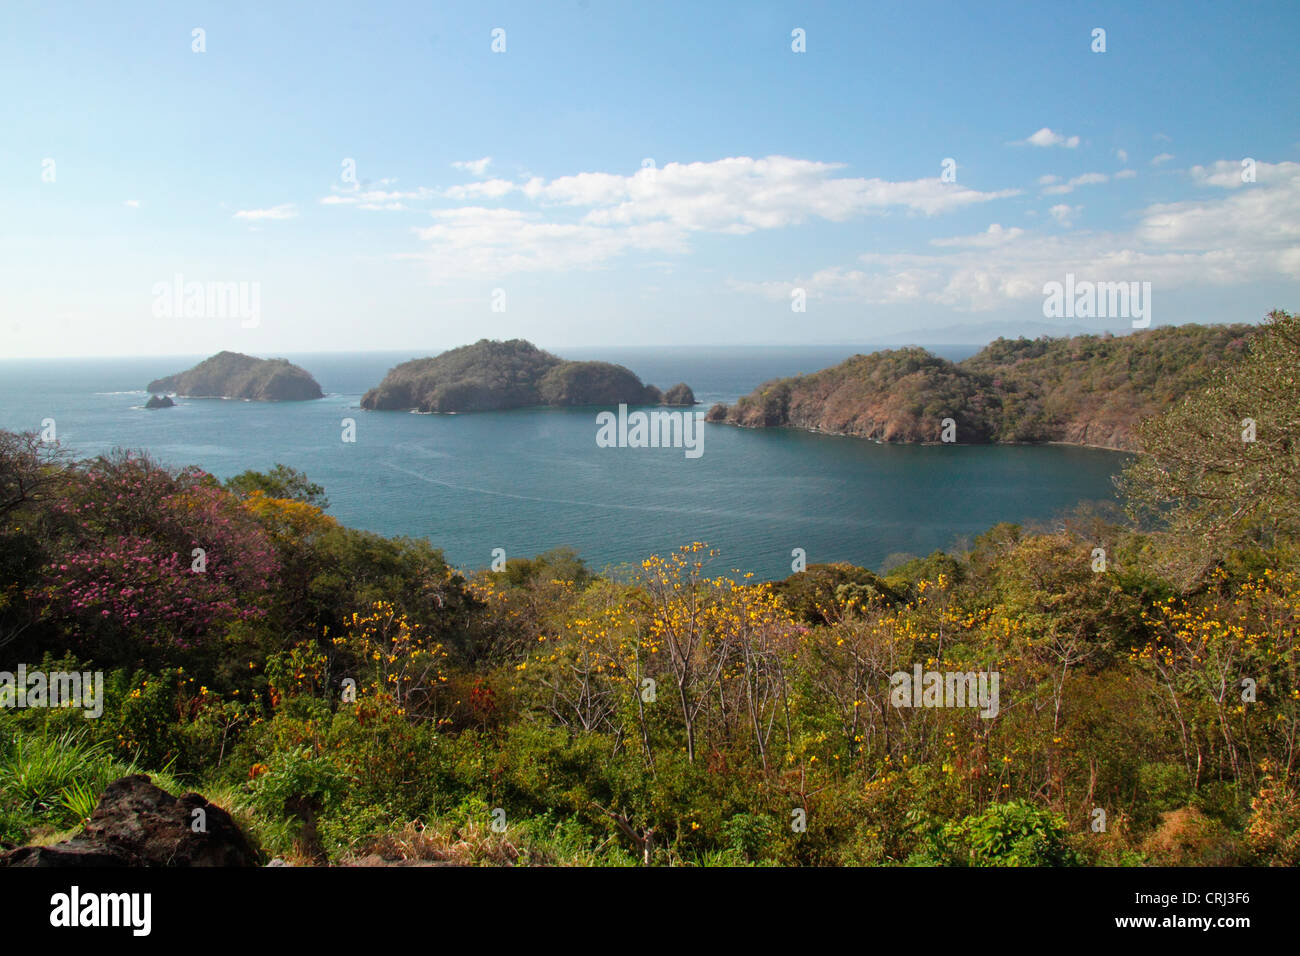 Islands in Gulf of Papagayo, north-west Costa Rica. January 2011. Stock Photo